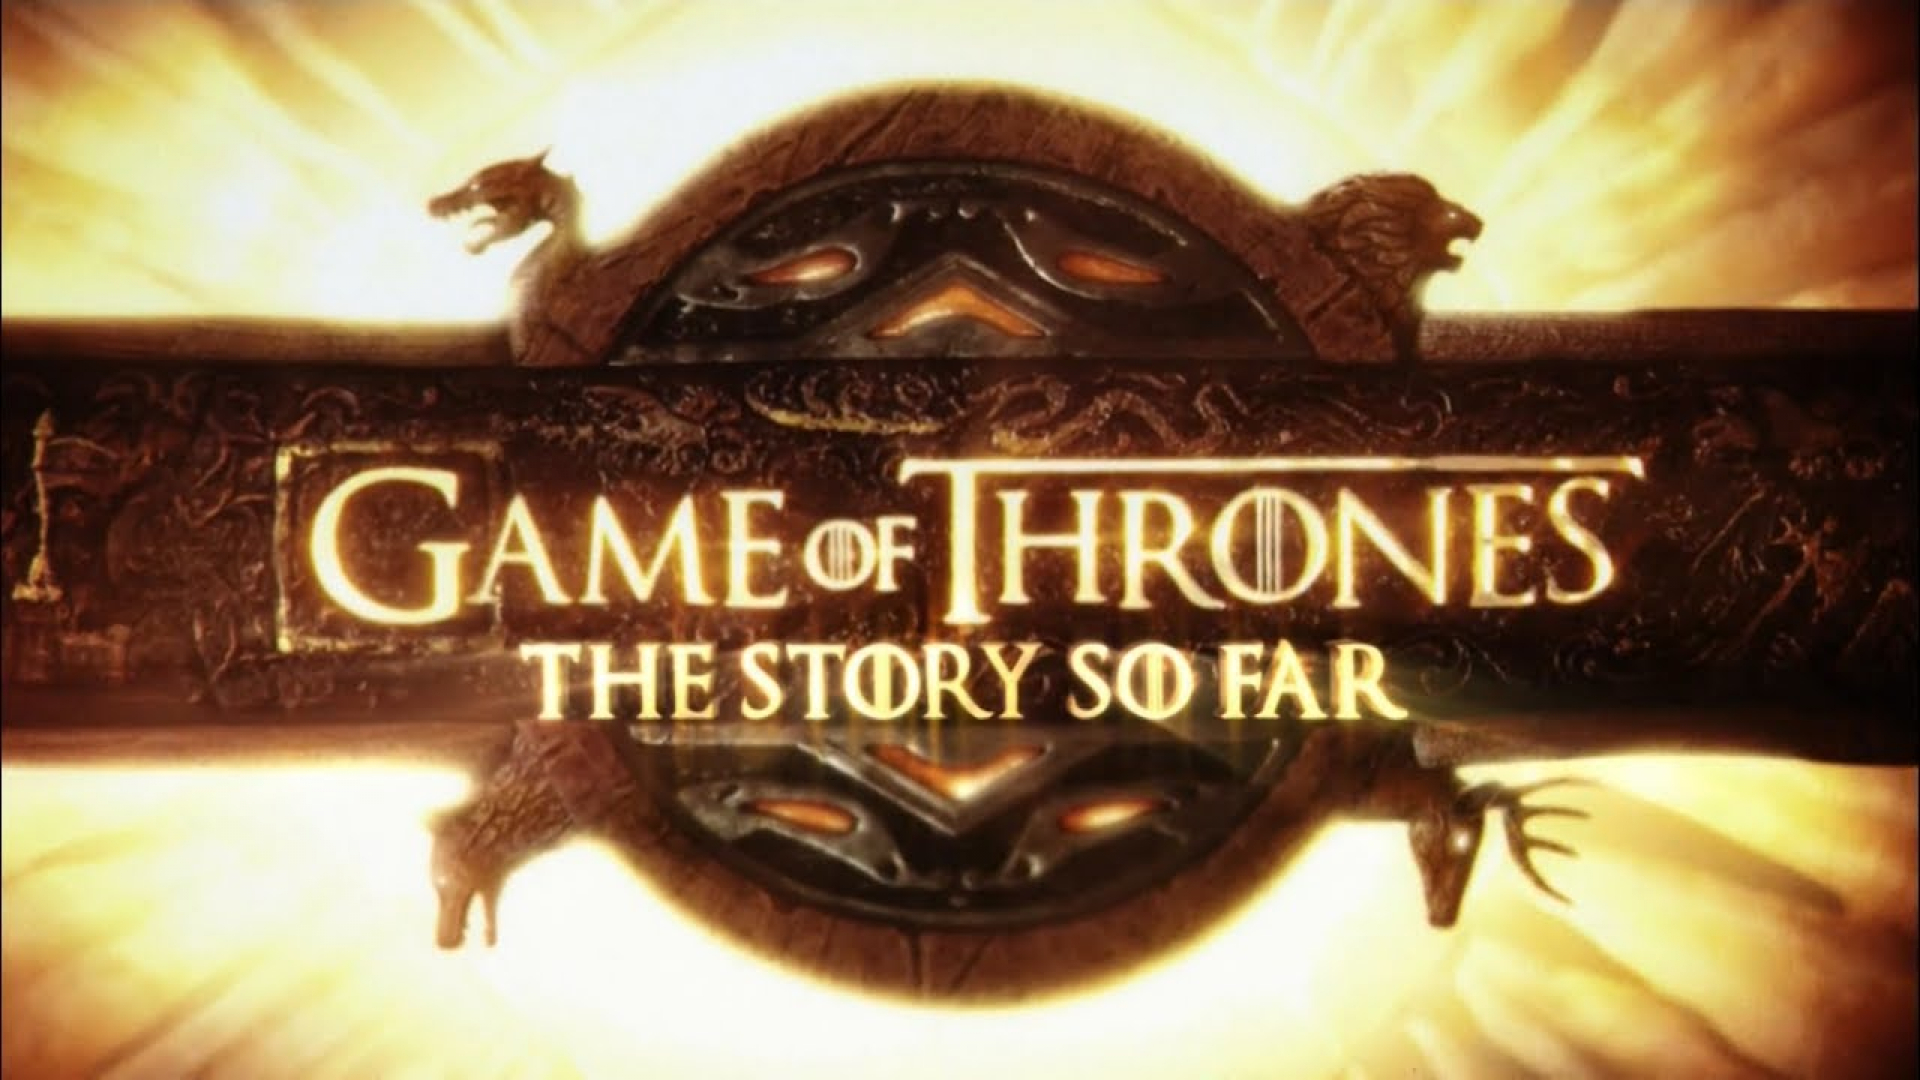 game of thrones mp3 download